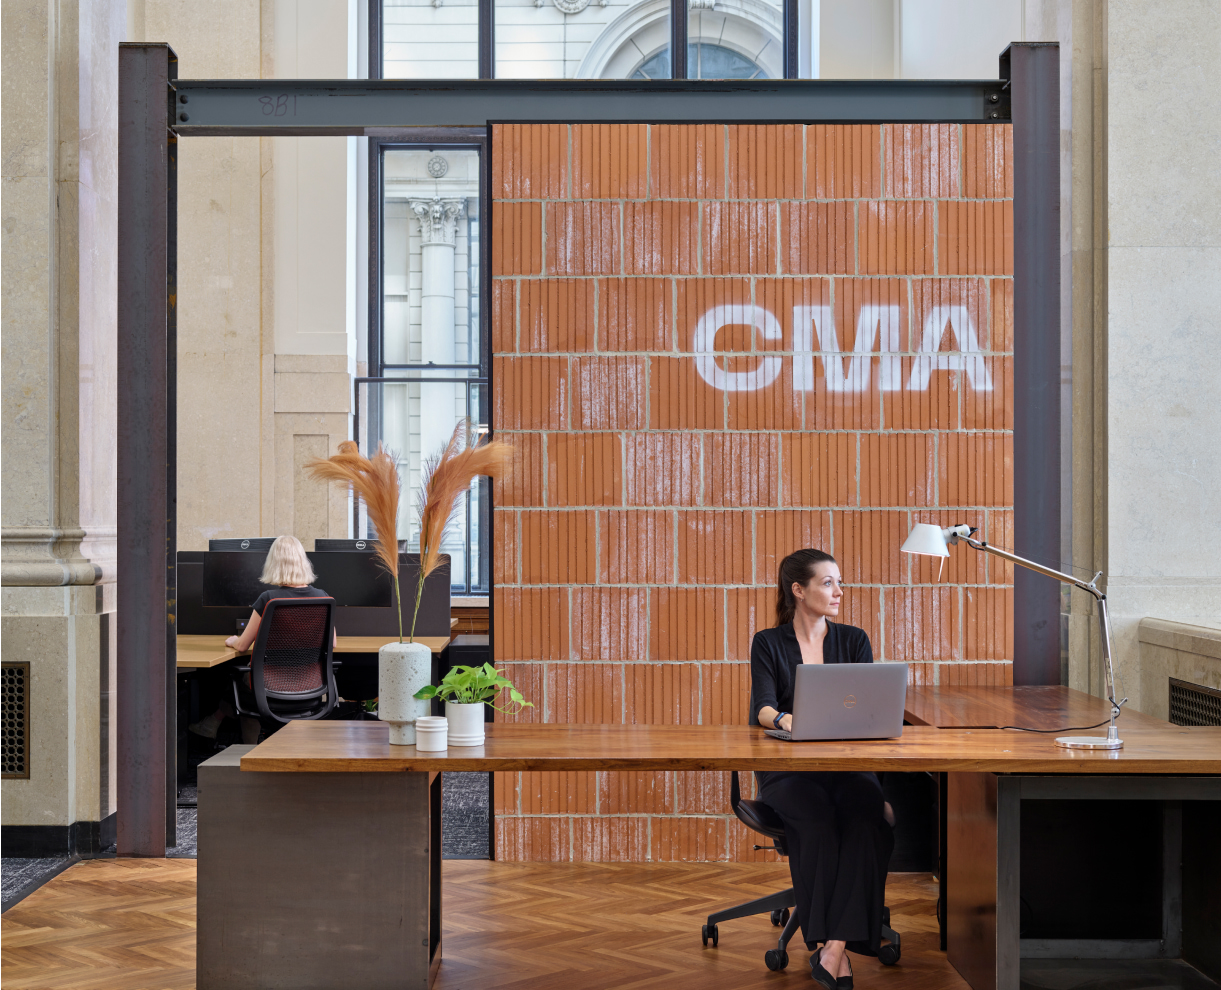 CMA reception desk where a woman is sitting behind a laptop, gazing out the window.